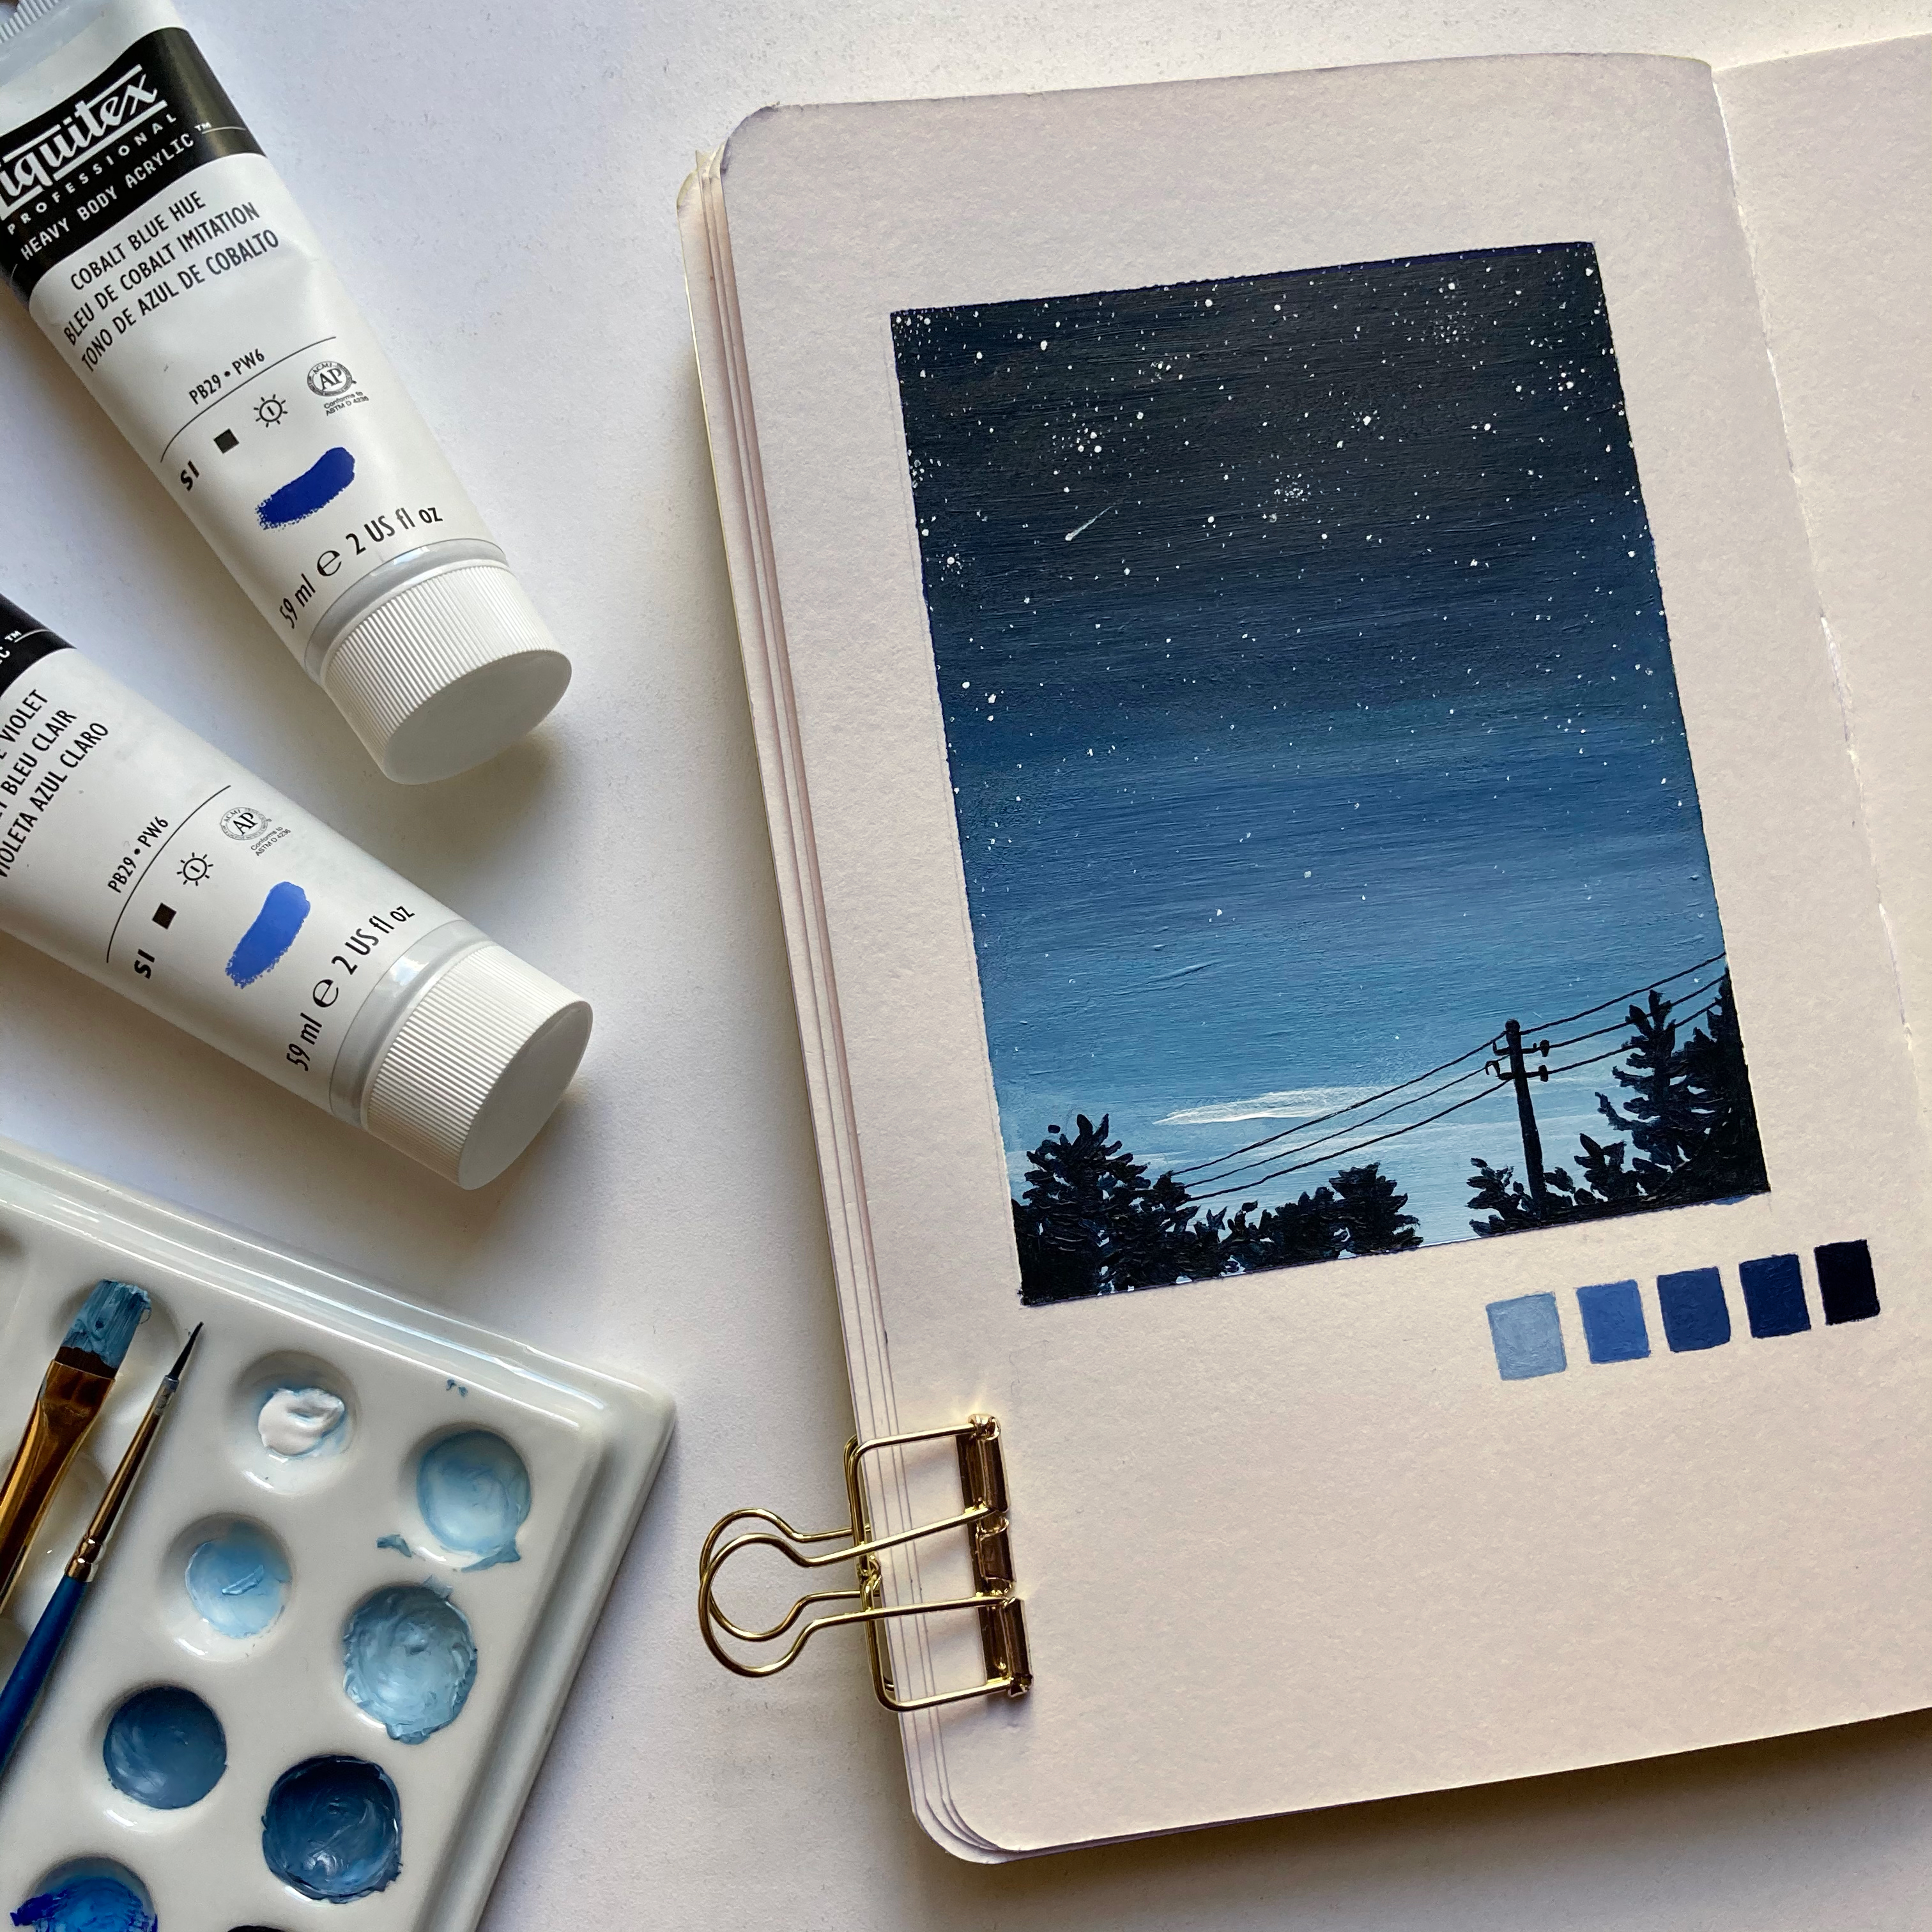 Sketchbook page showing blue sky at dusk with trees and a telephone pole silhouetted.